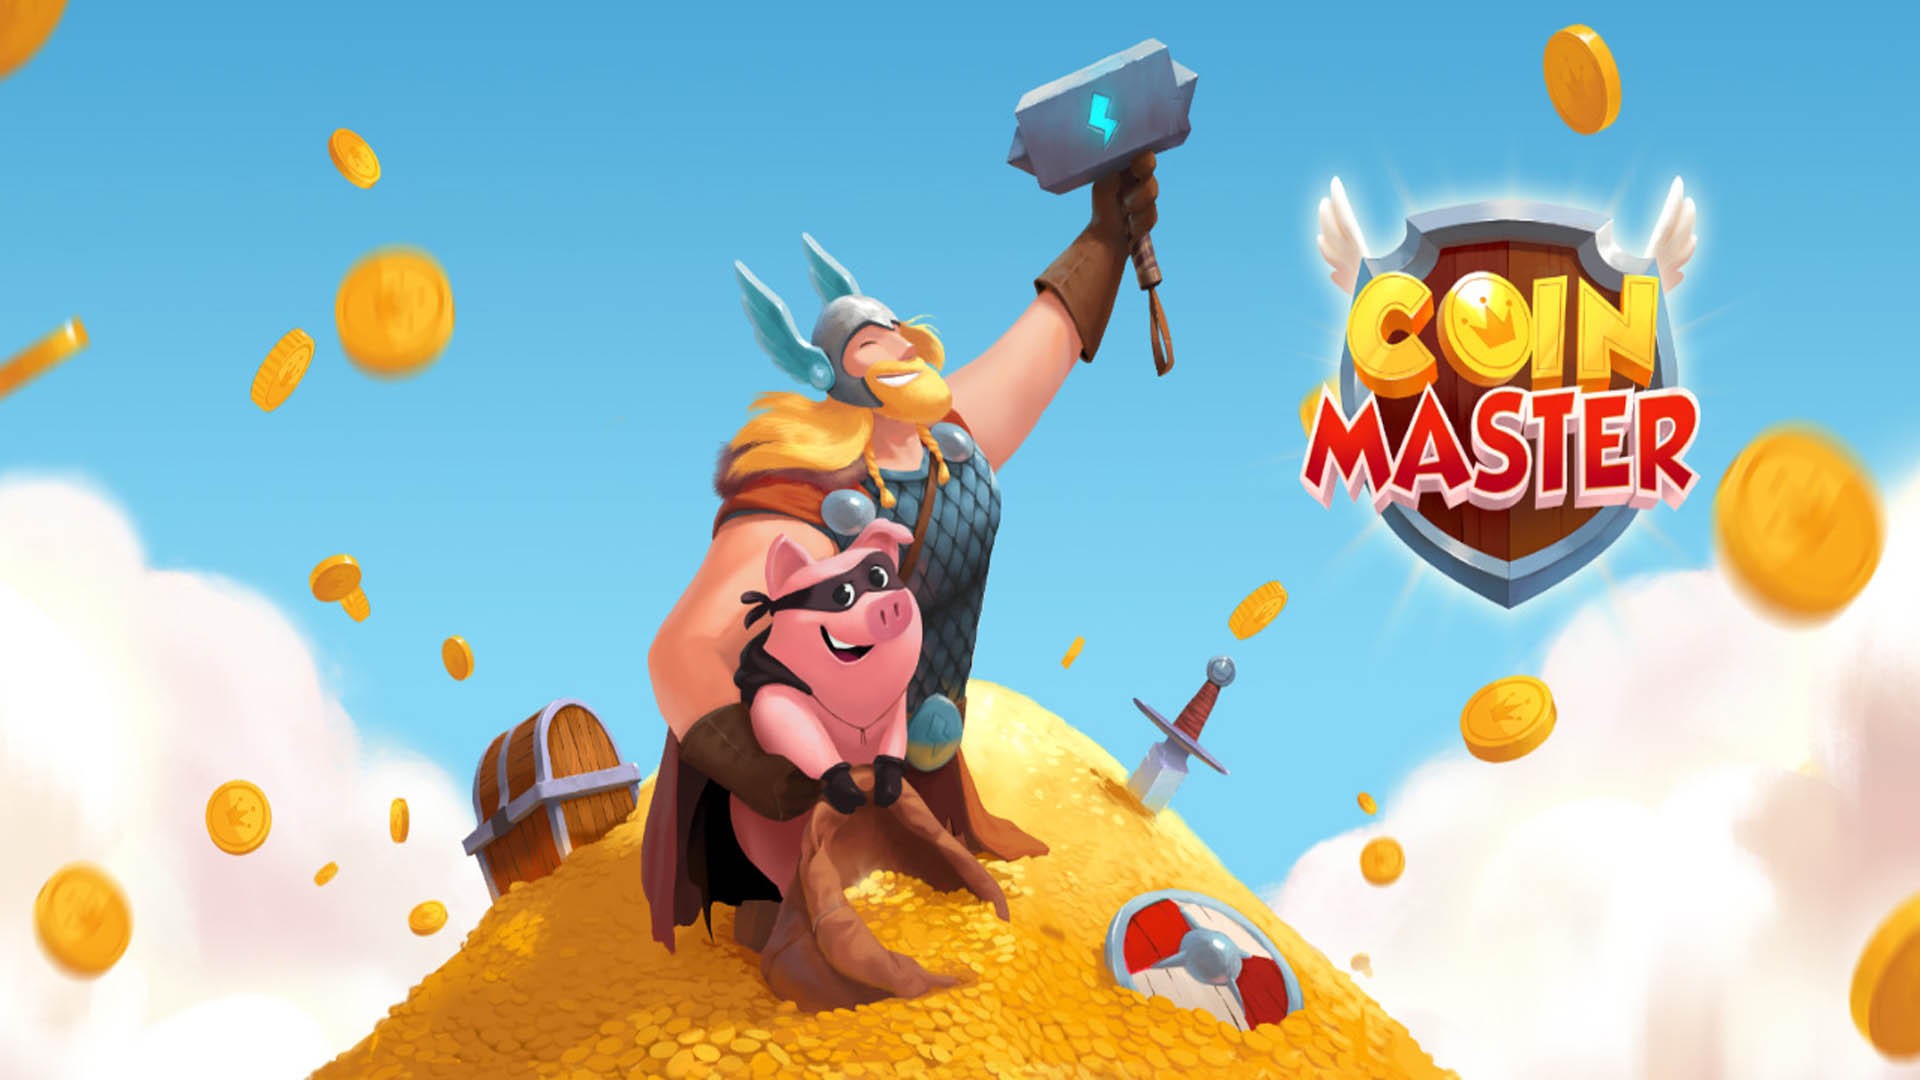 Coin Master Free Spins Gallery - Sensod